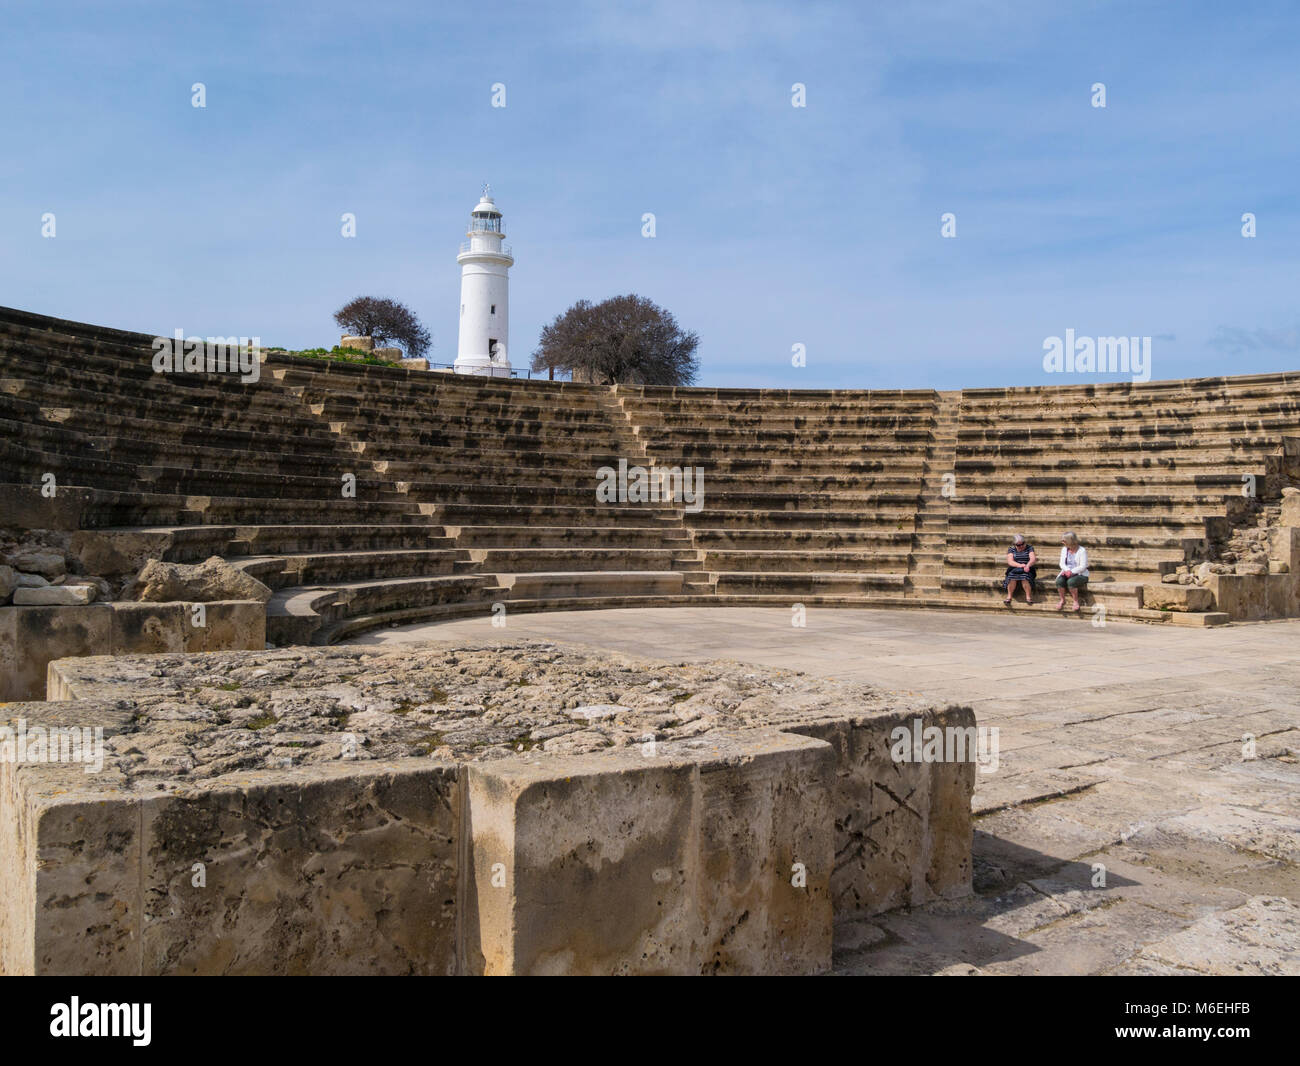 Remains of Odeon Theatre seating 1200 people Nea Pafos Archaelogical Park Kato Pafos Phaphos Southern Cyprus now used for outdoor entertainment Stock Photo